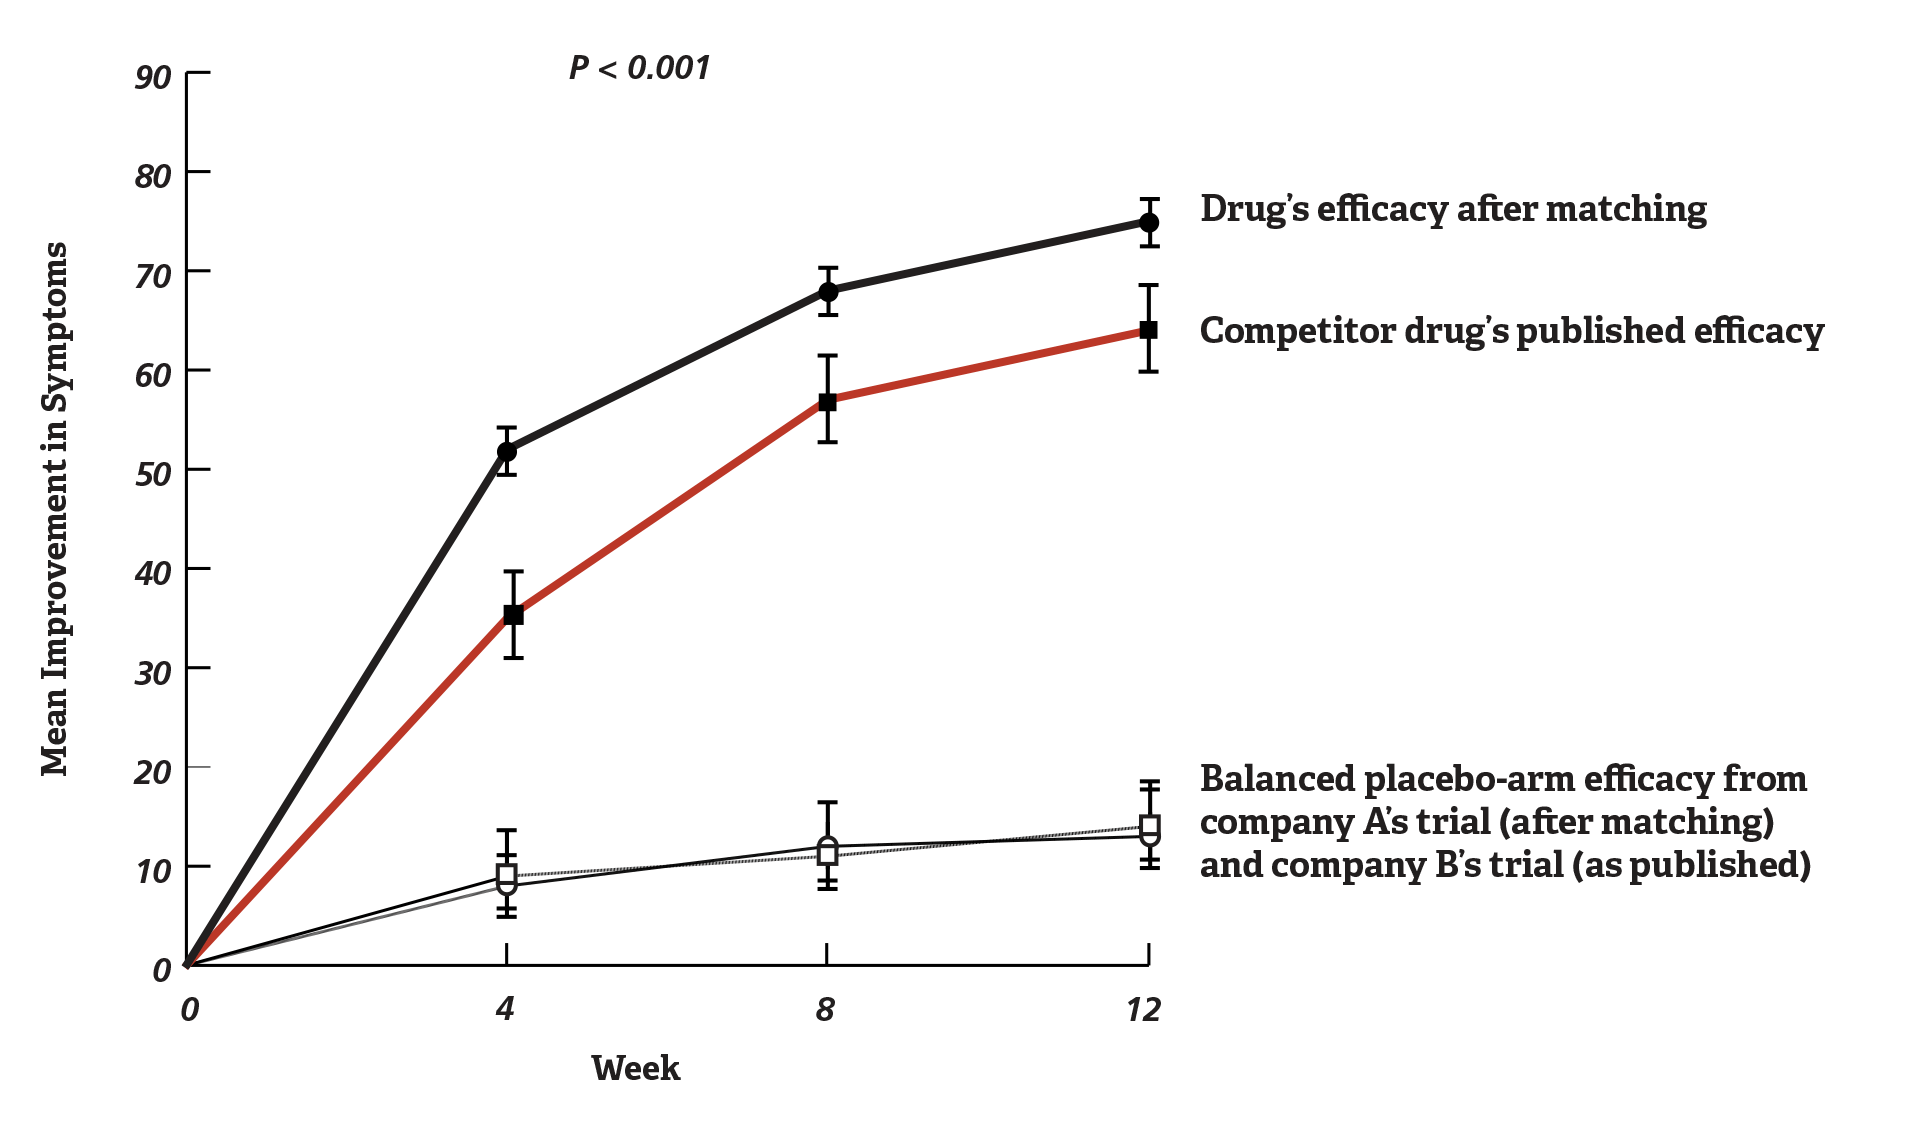 Figure 2. Comparison of Outcomes between Matched Trials